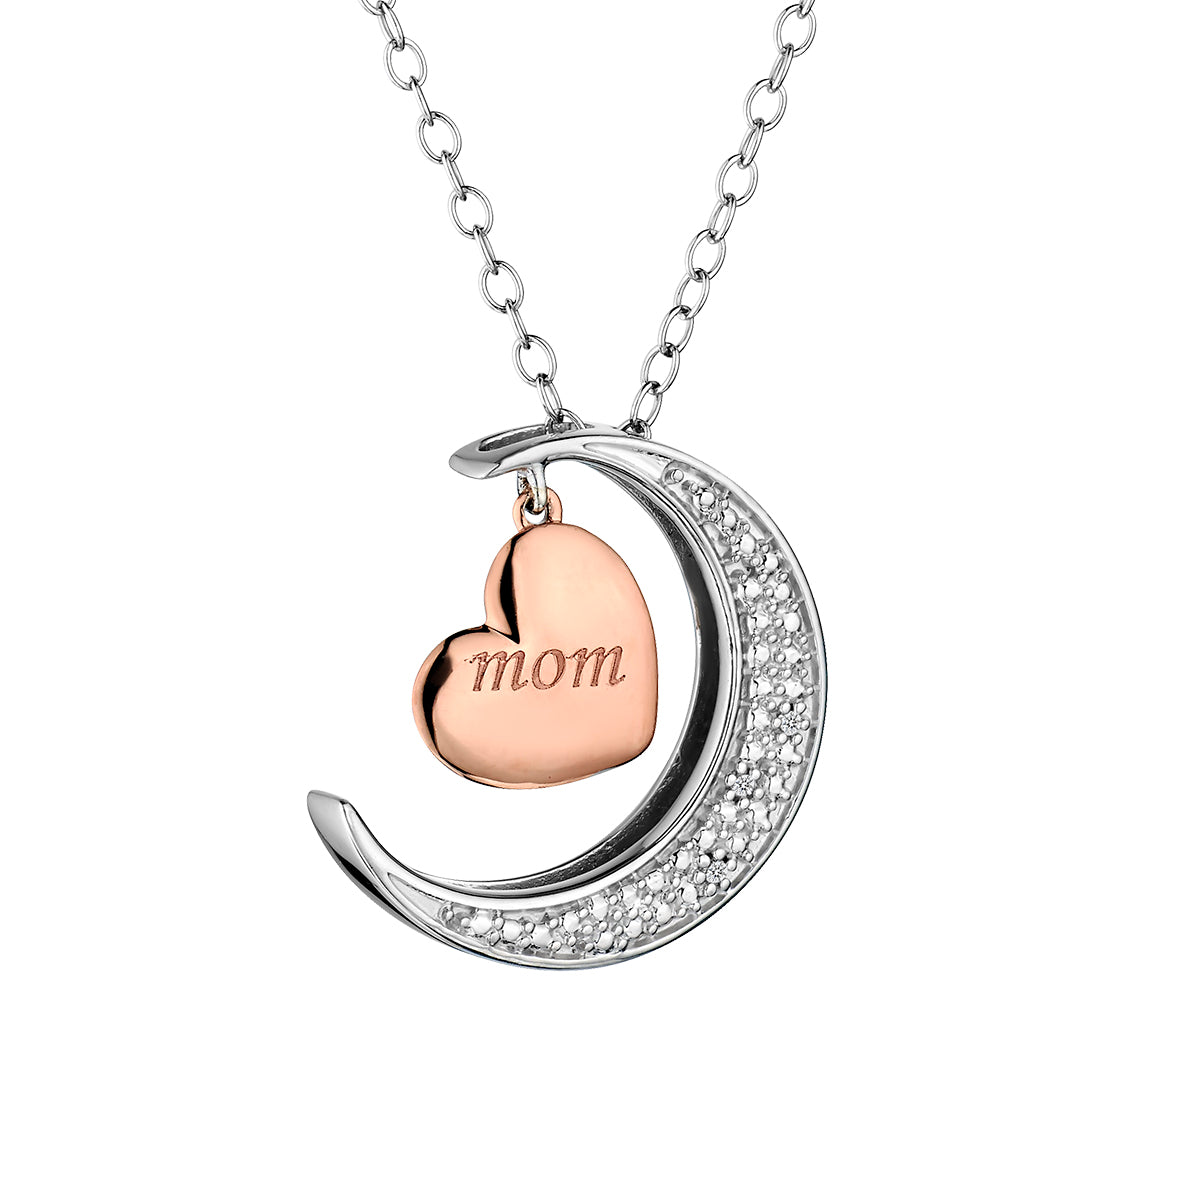 "I Love You To The Moon and Back" Diamond Pendant, 10kt Rose Gold and Sterling Silver.......................NOW